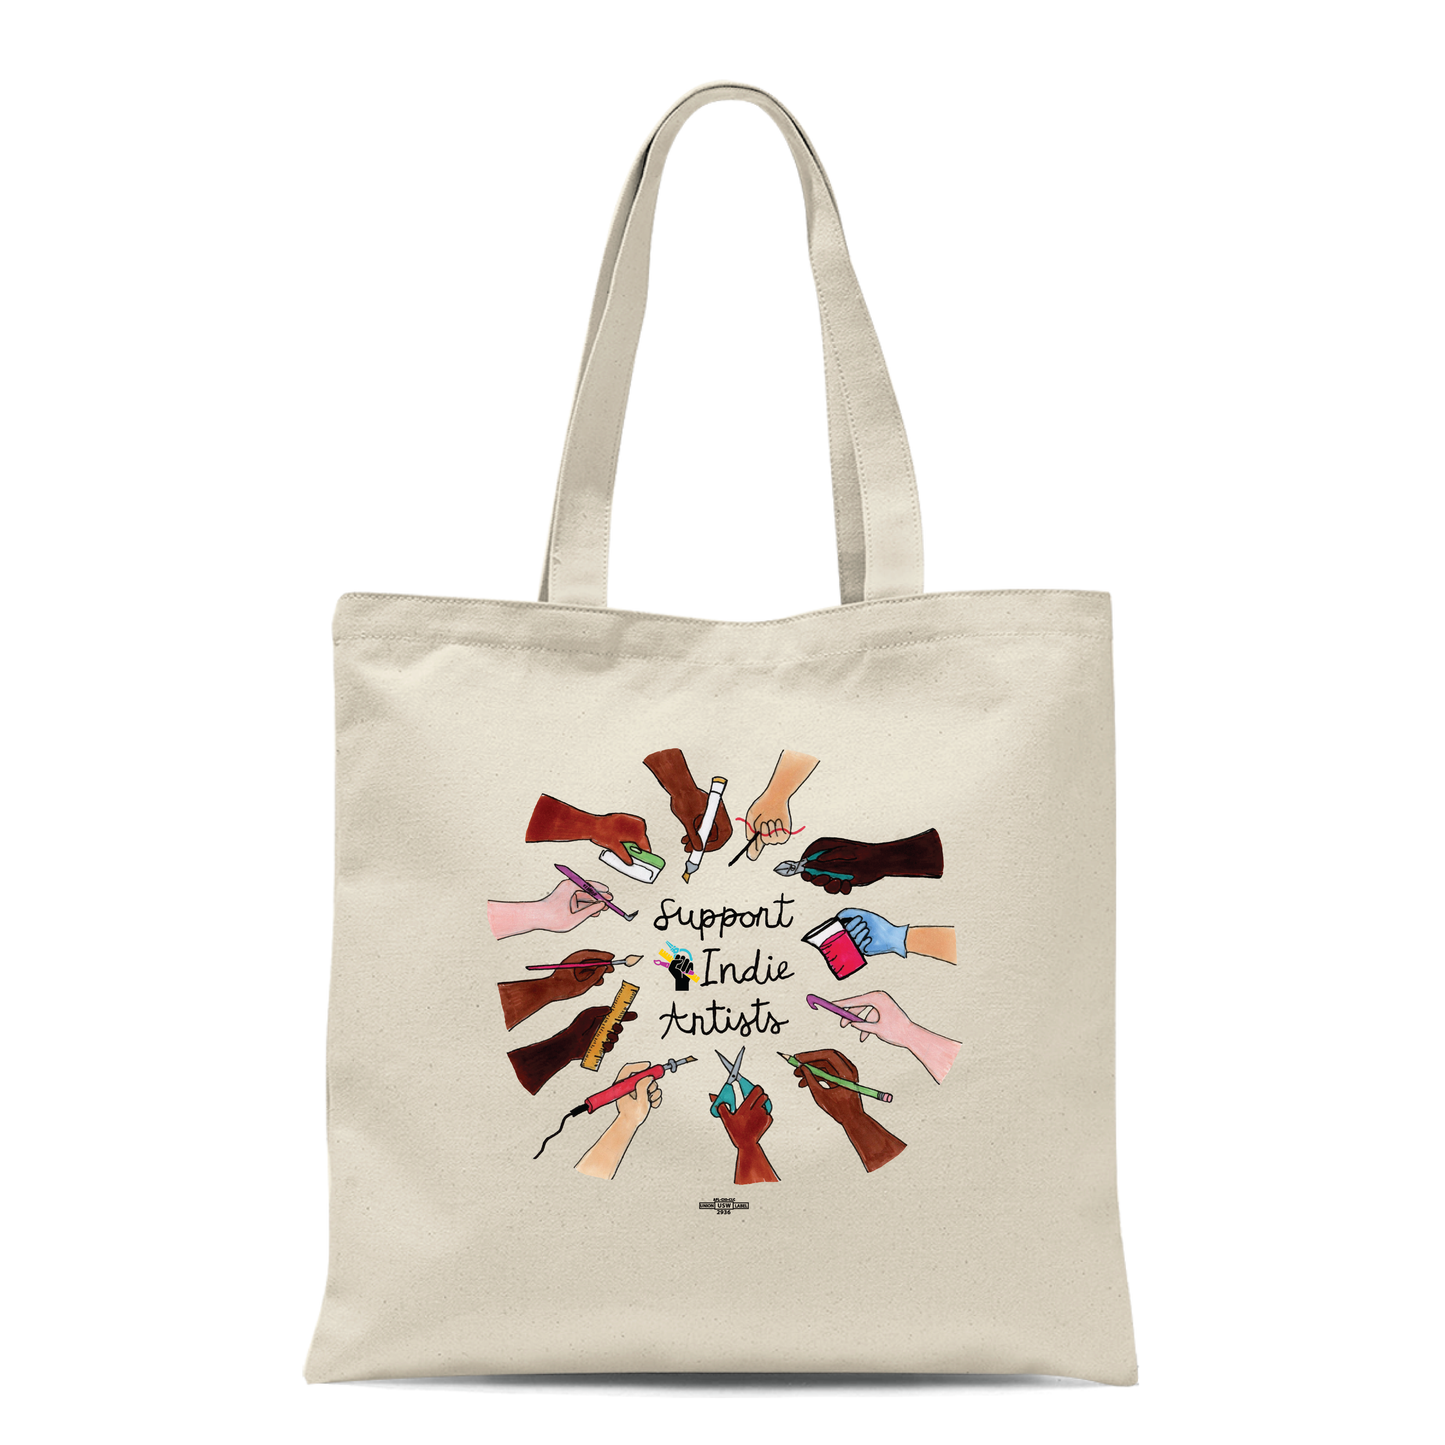 Support Indie Artists Tote Bag